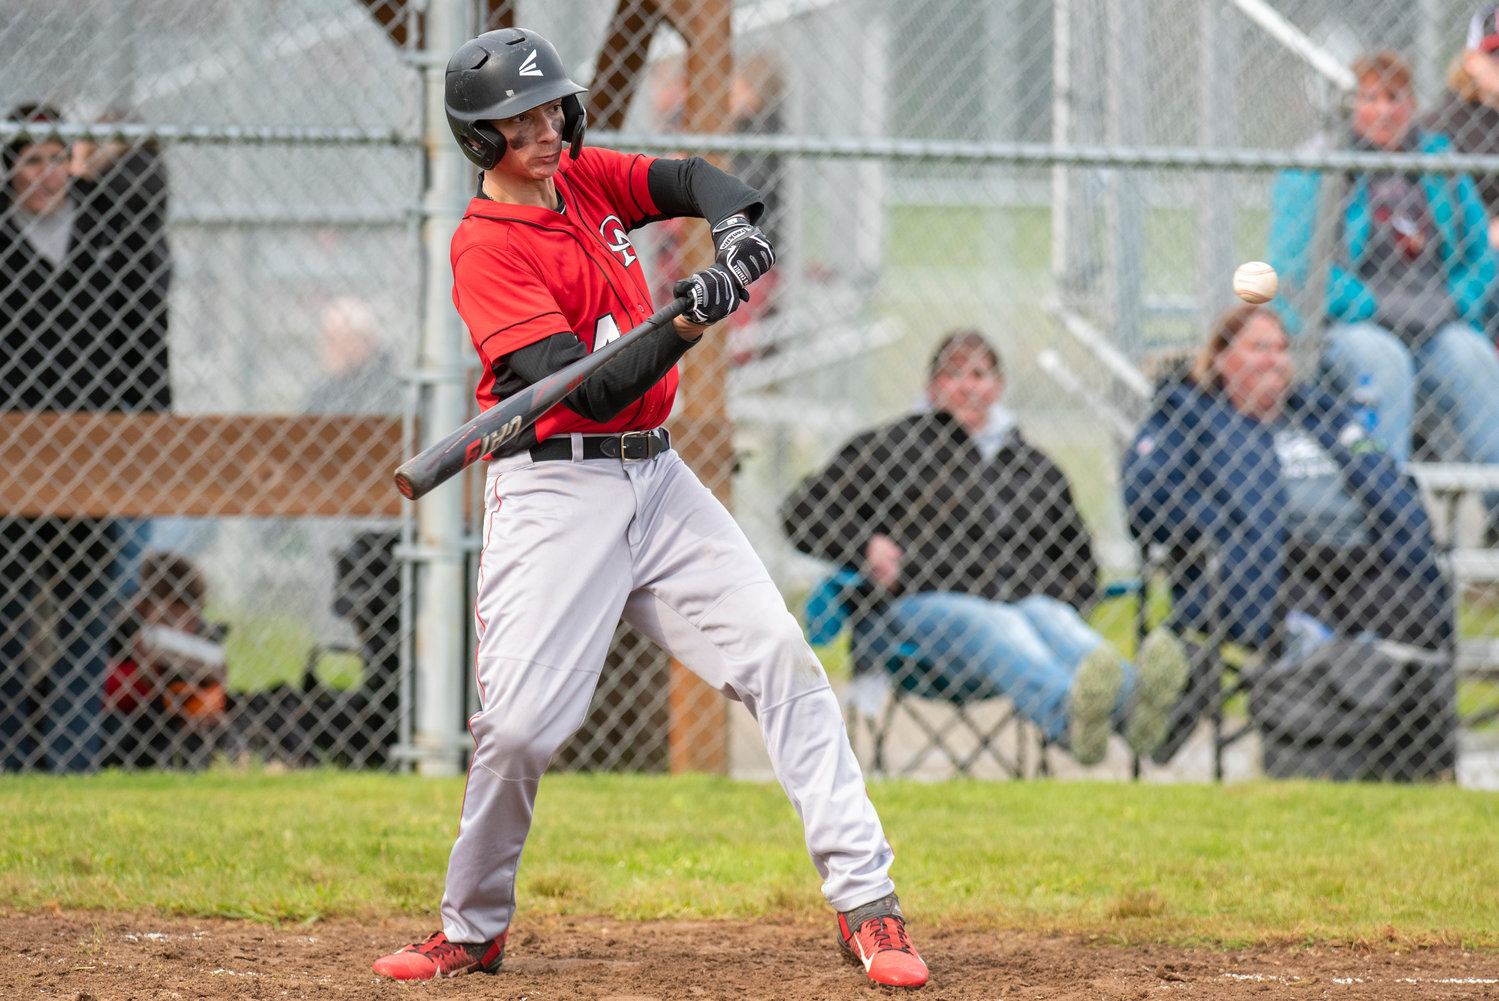 An Oakville batter lines up a Mossyrock pitch during a home game on April 28.